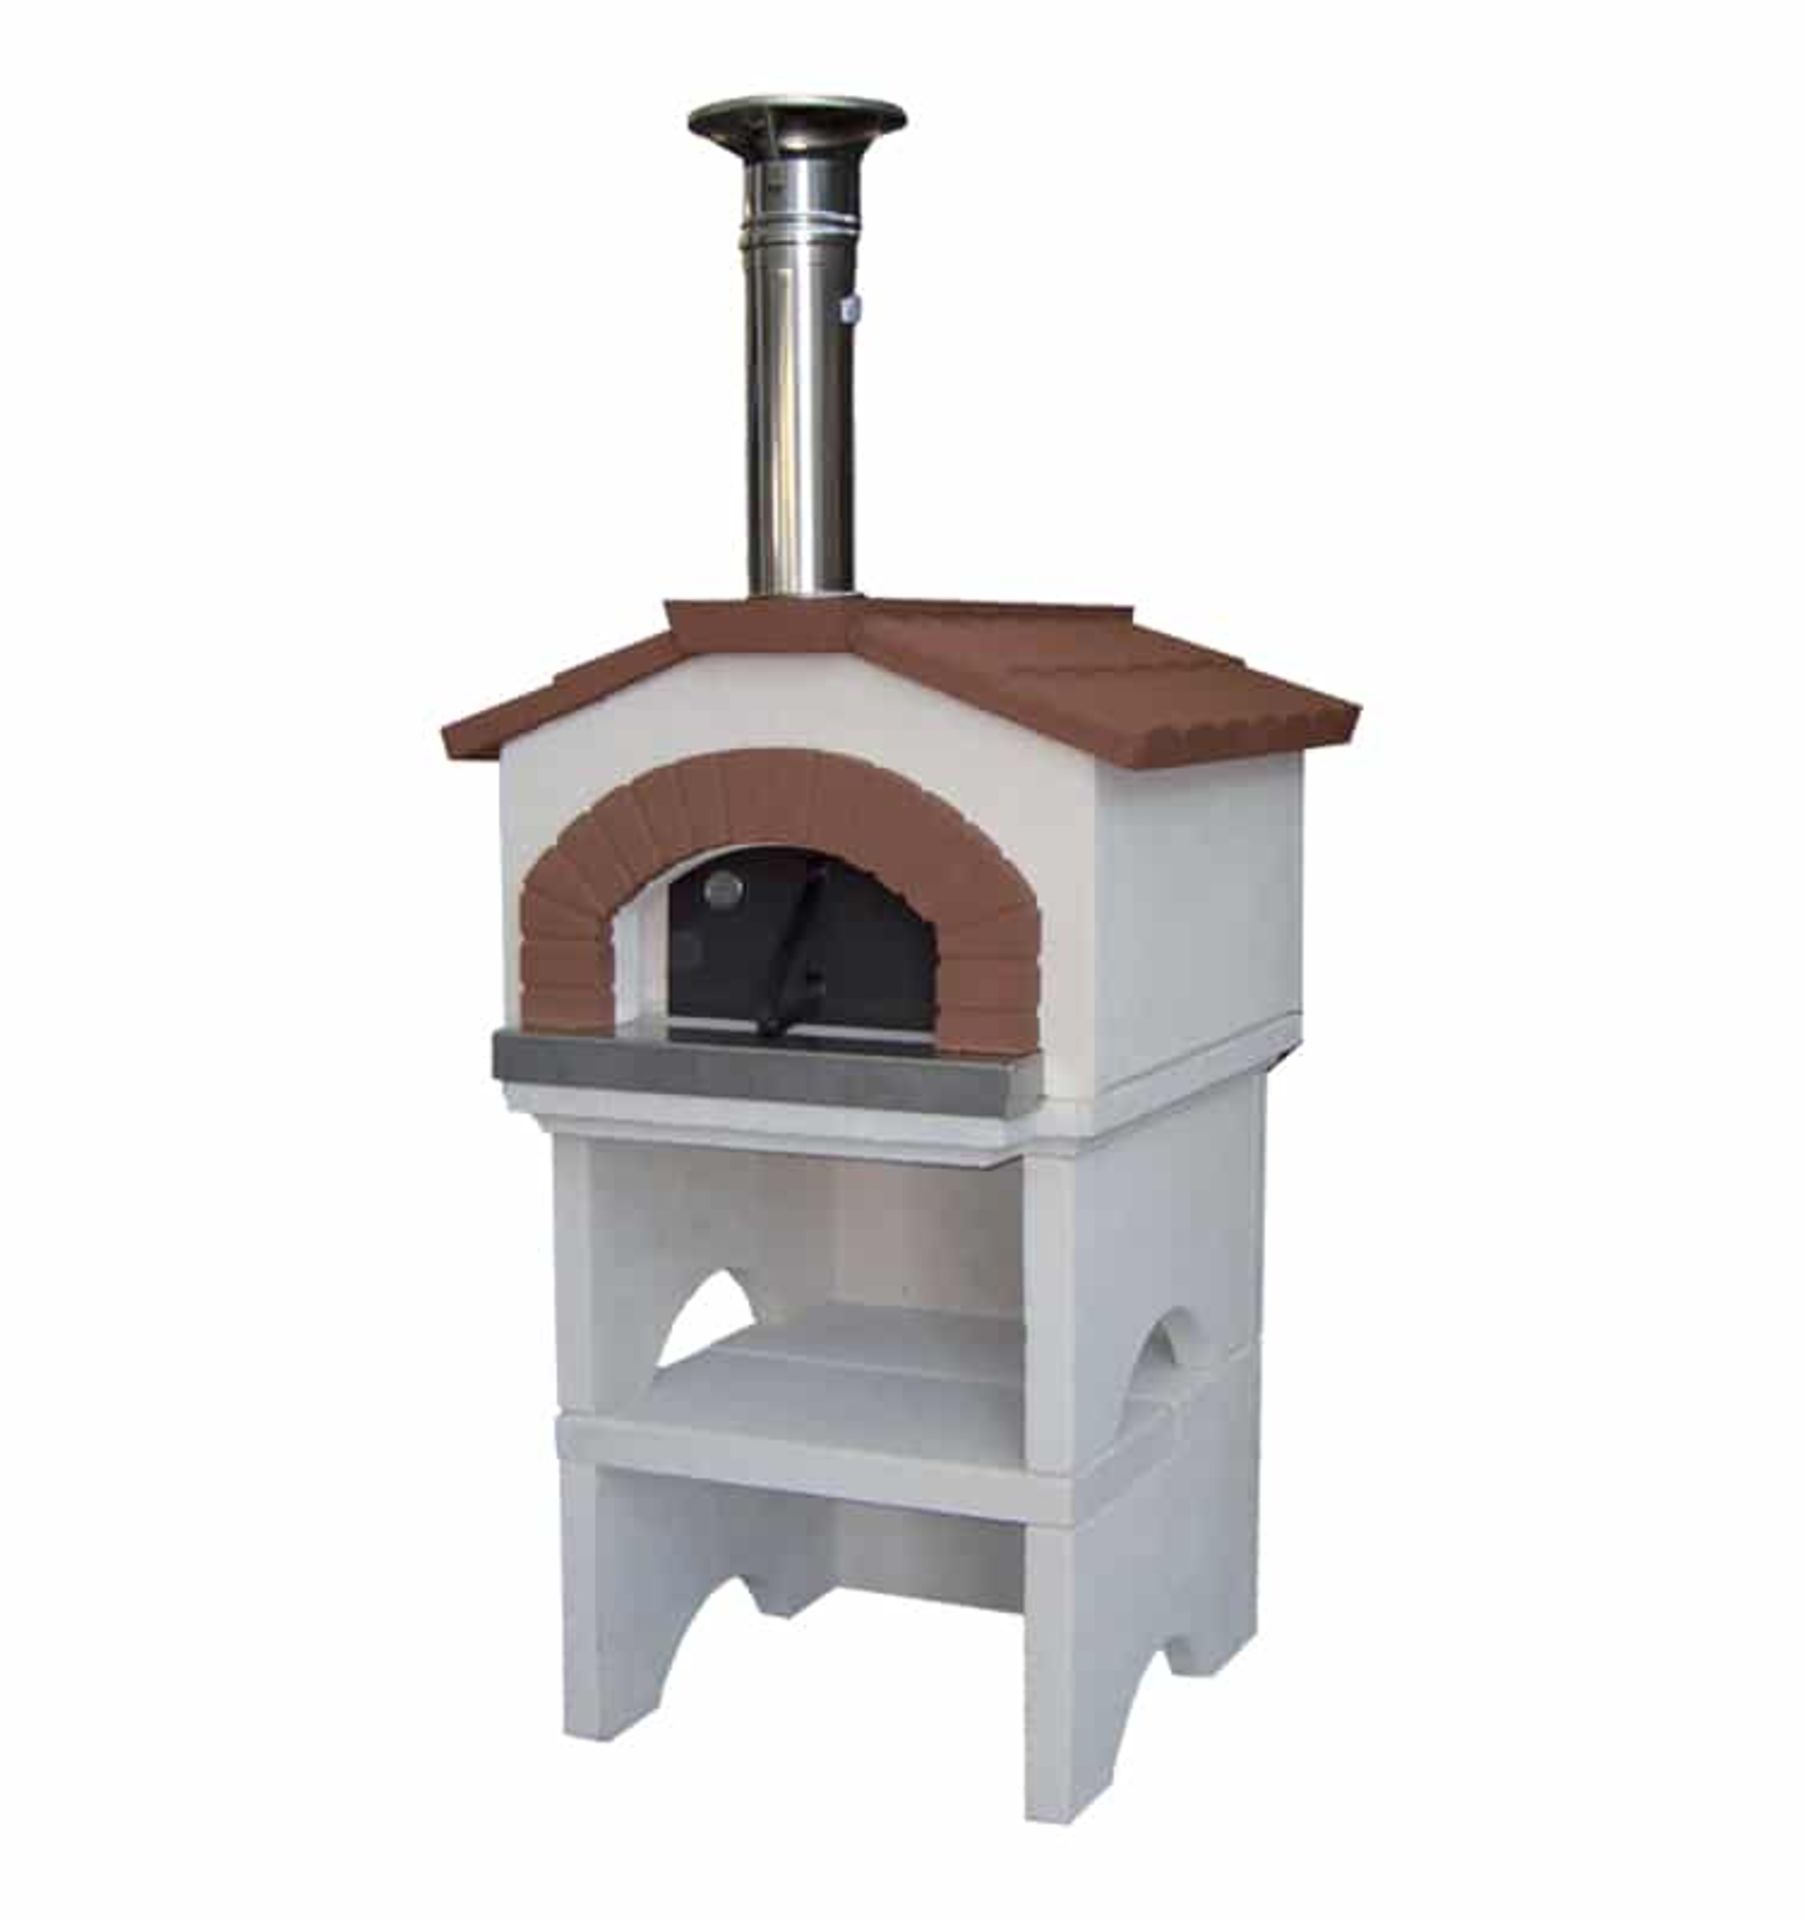 Ponza Wood Burning Oven, Weight 690 kg, Oven dimensions L 94, P 103, H 207 cm, Cooking capacity: